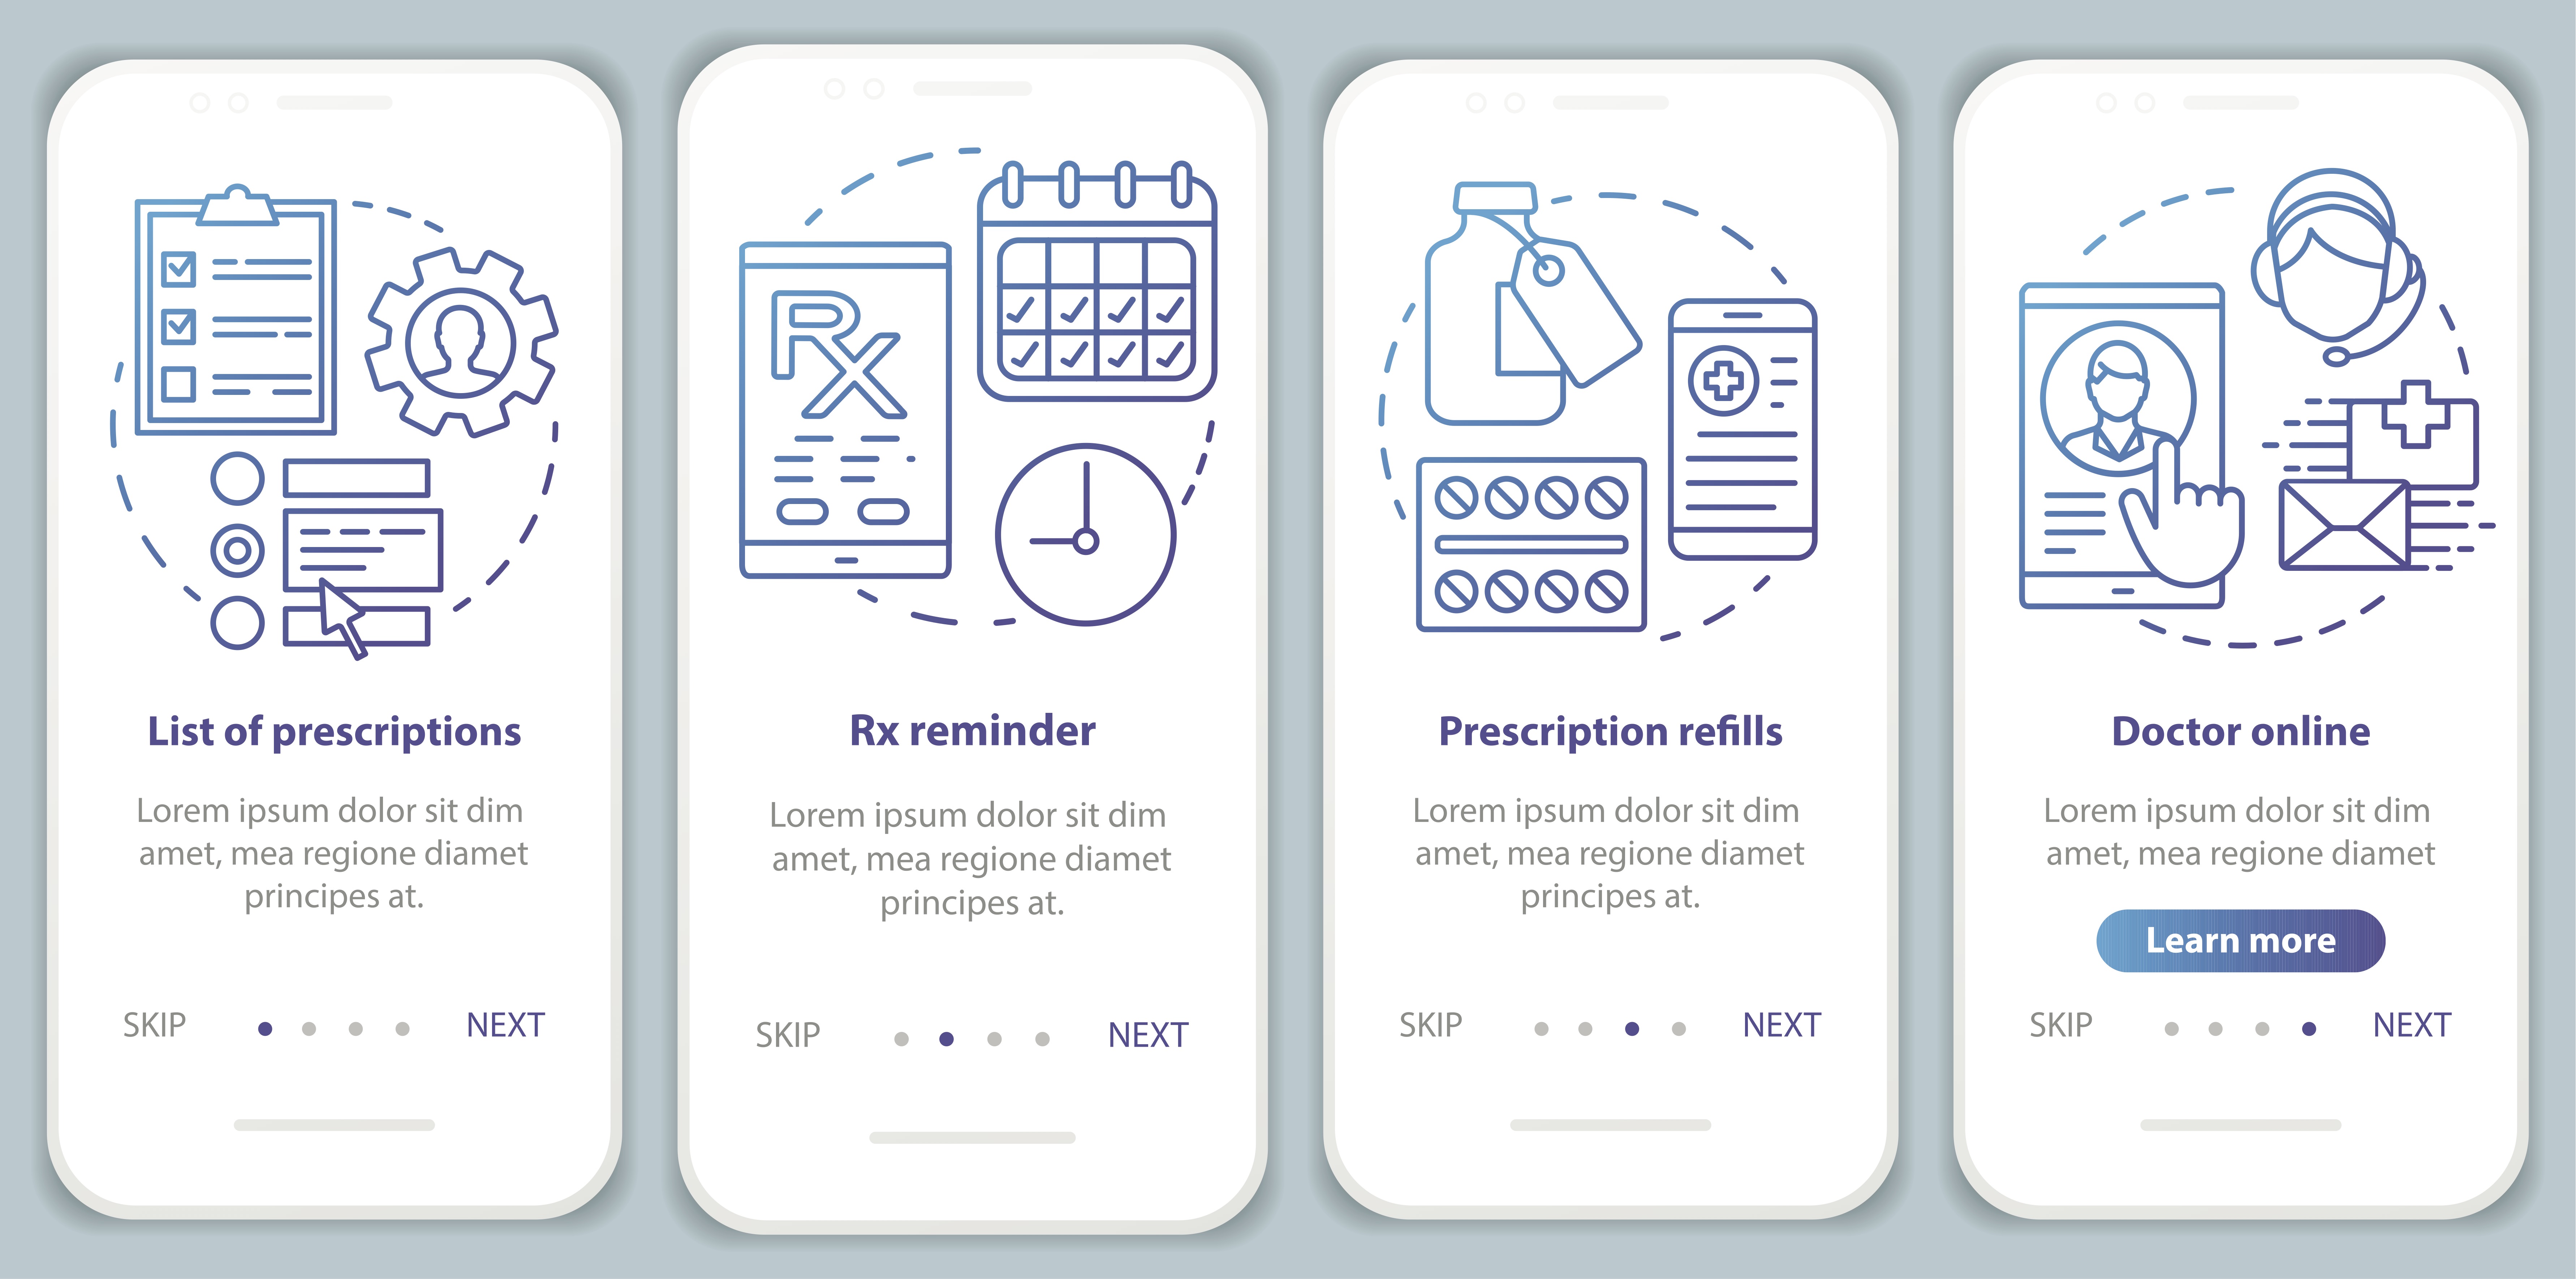 e-Prescribing applications need to access databases and networks that give doctors additional information about patients.